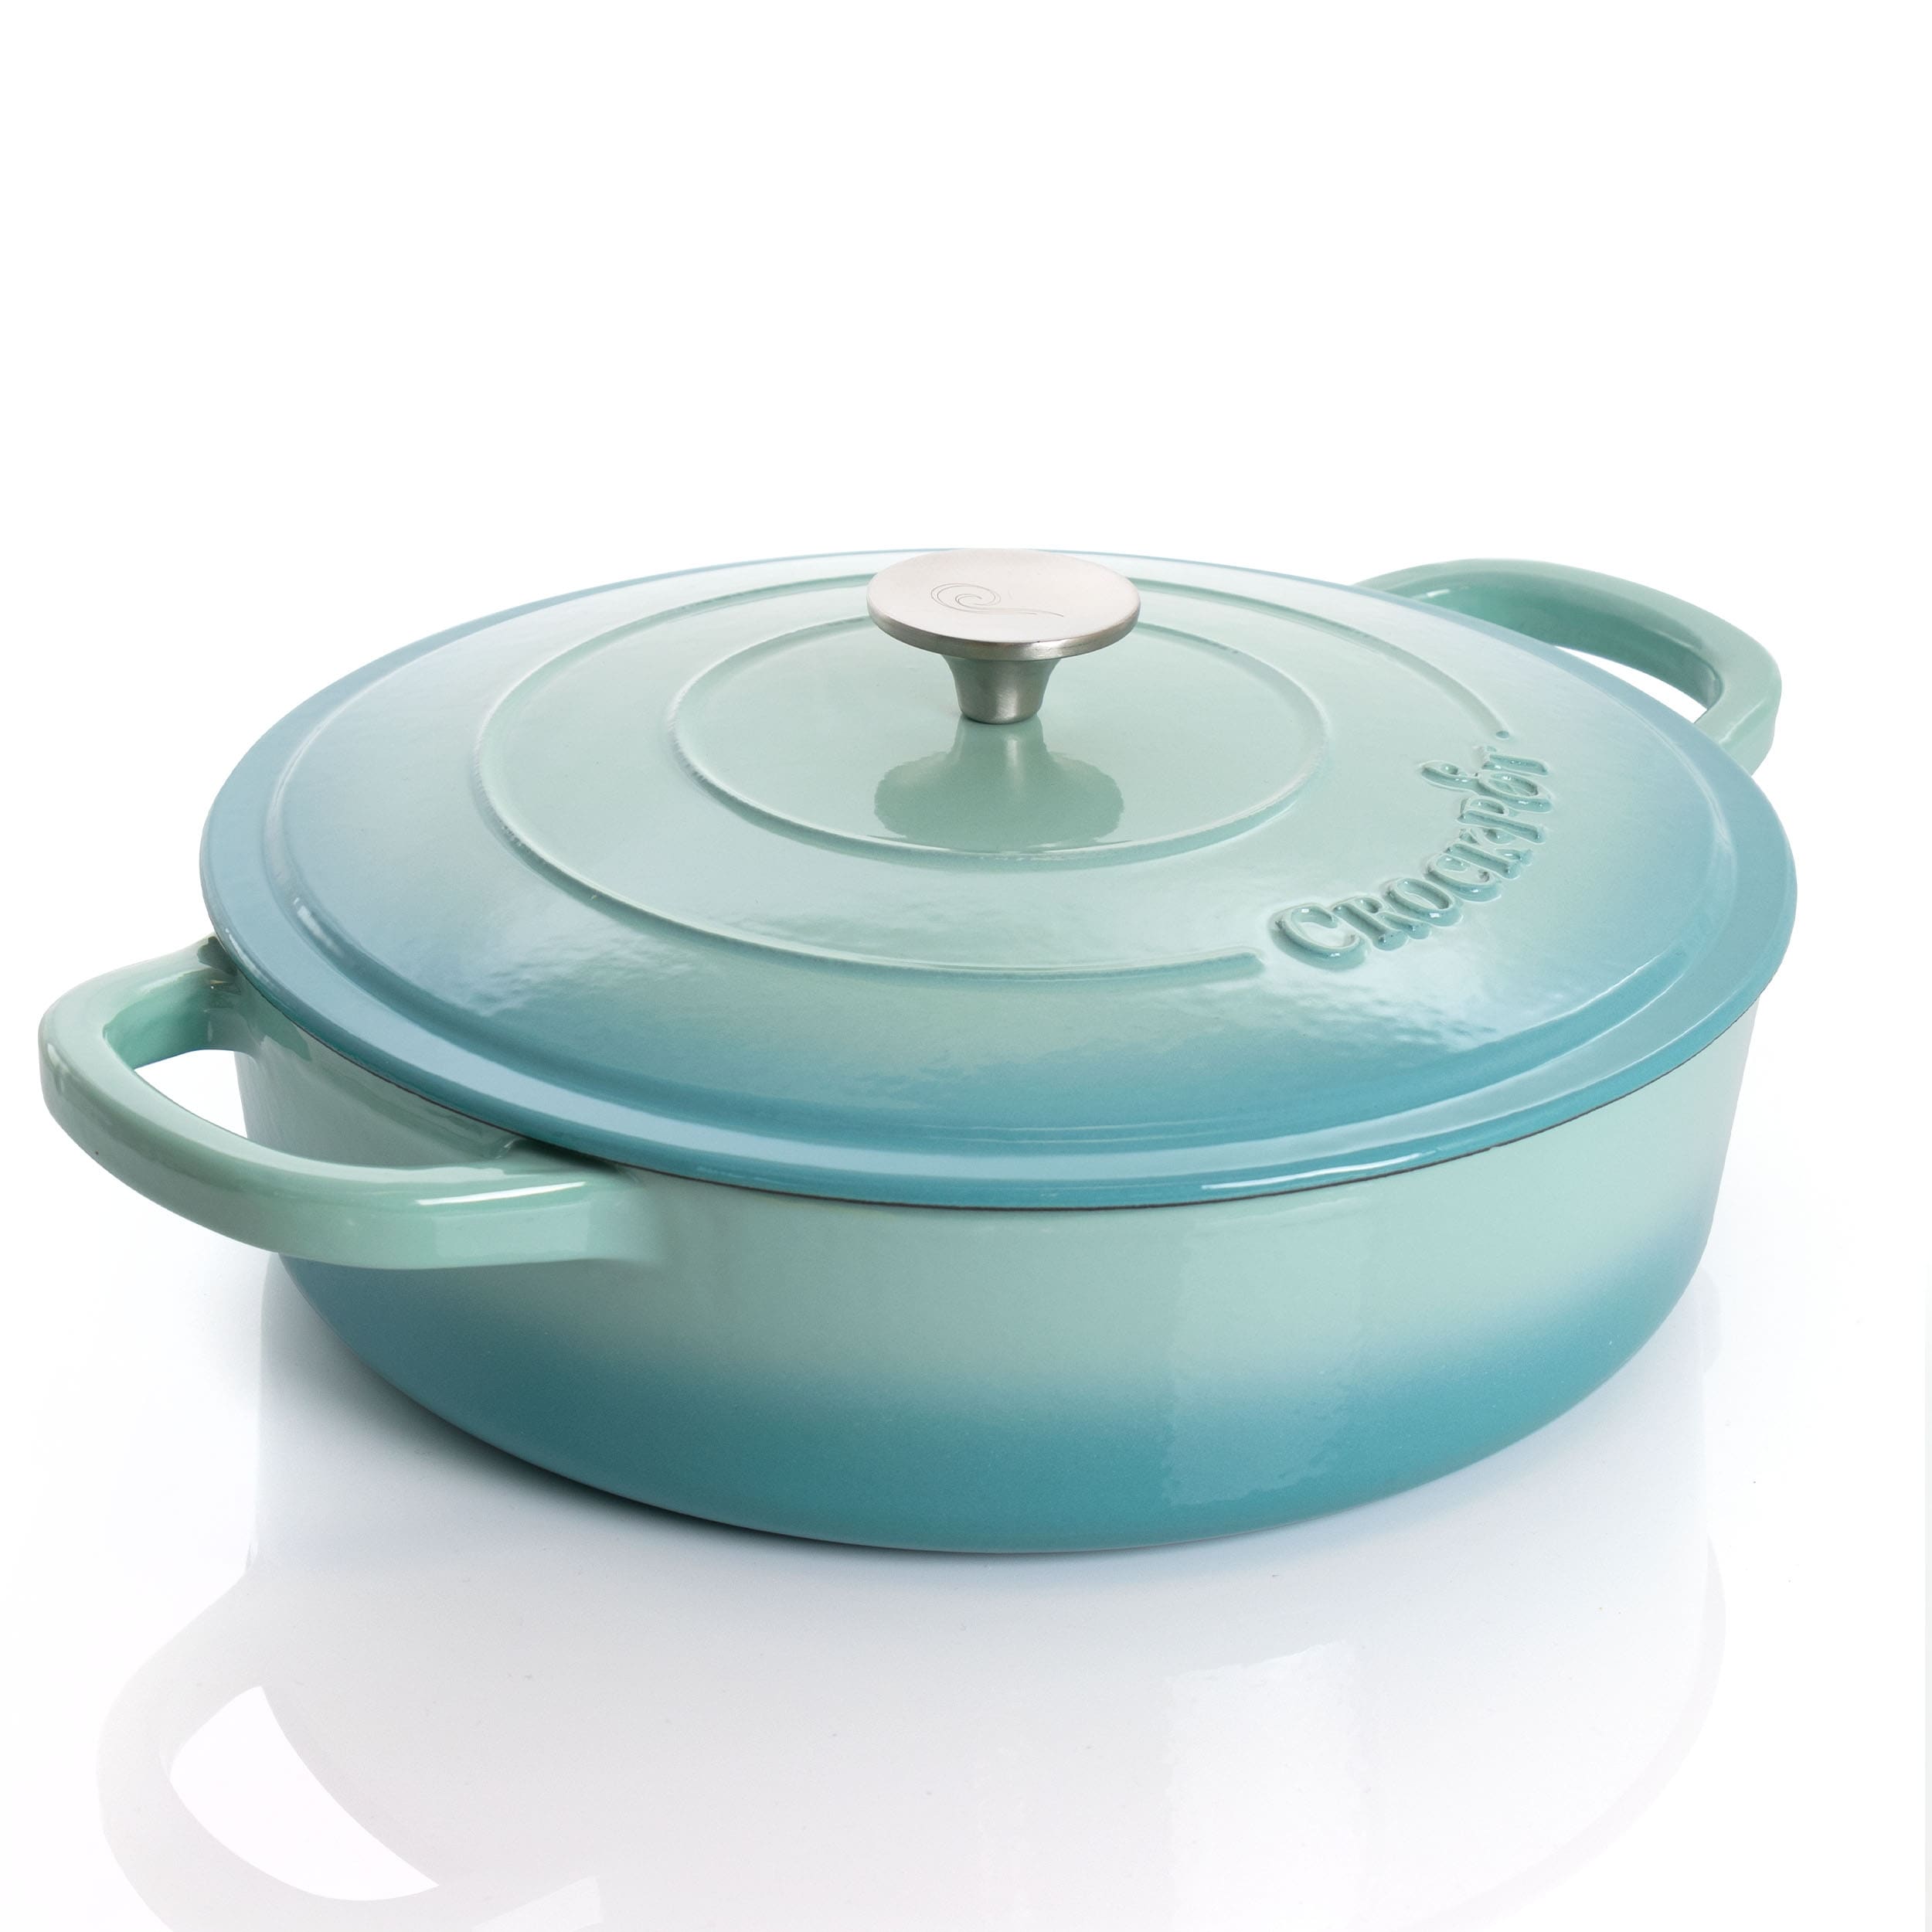 https://ak1.ostkcdn.com/images/products/is/images/direct/d1e39064326cd73c8c181f5a98fc2fc1873b57ef/5-Quart-Round-Enameled-Cast-Iron-Braiser-Pan-With-Lid-in-Arctic-Teal.jpg